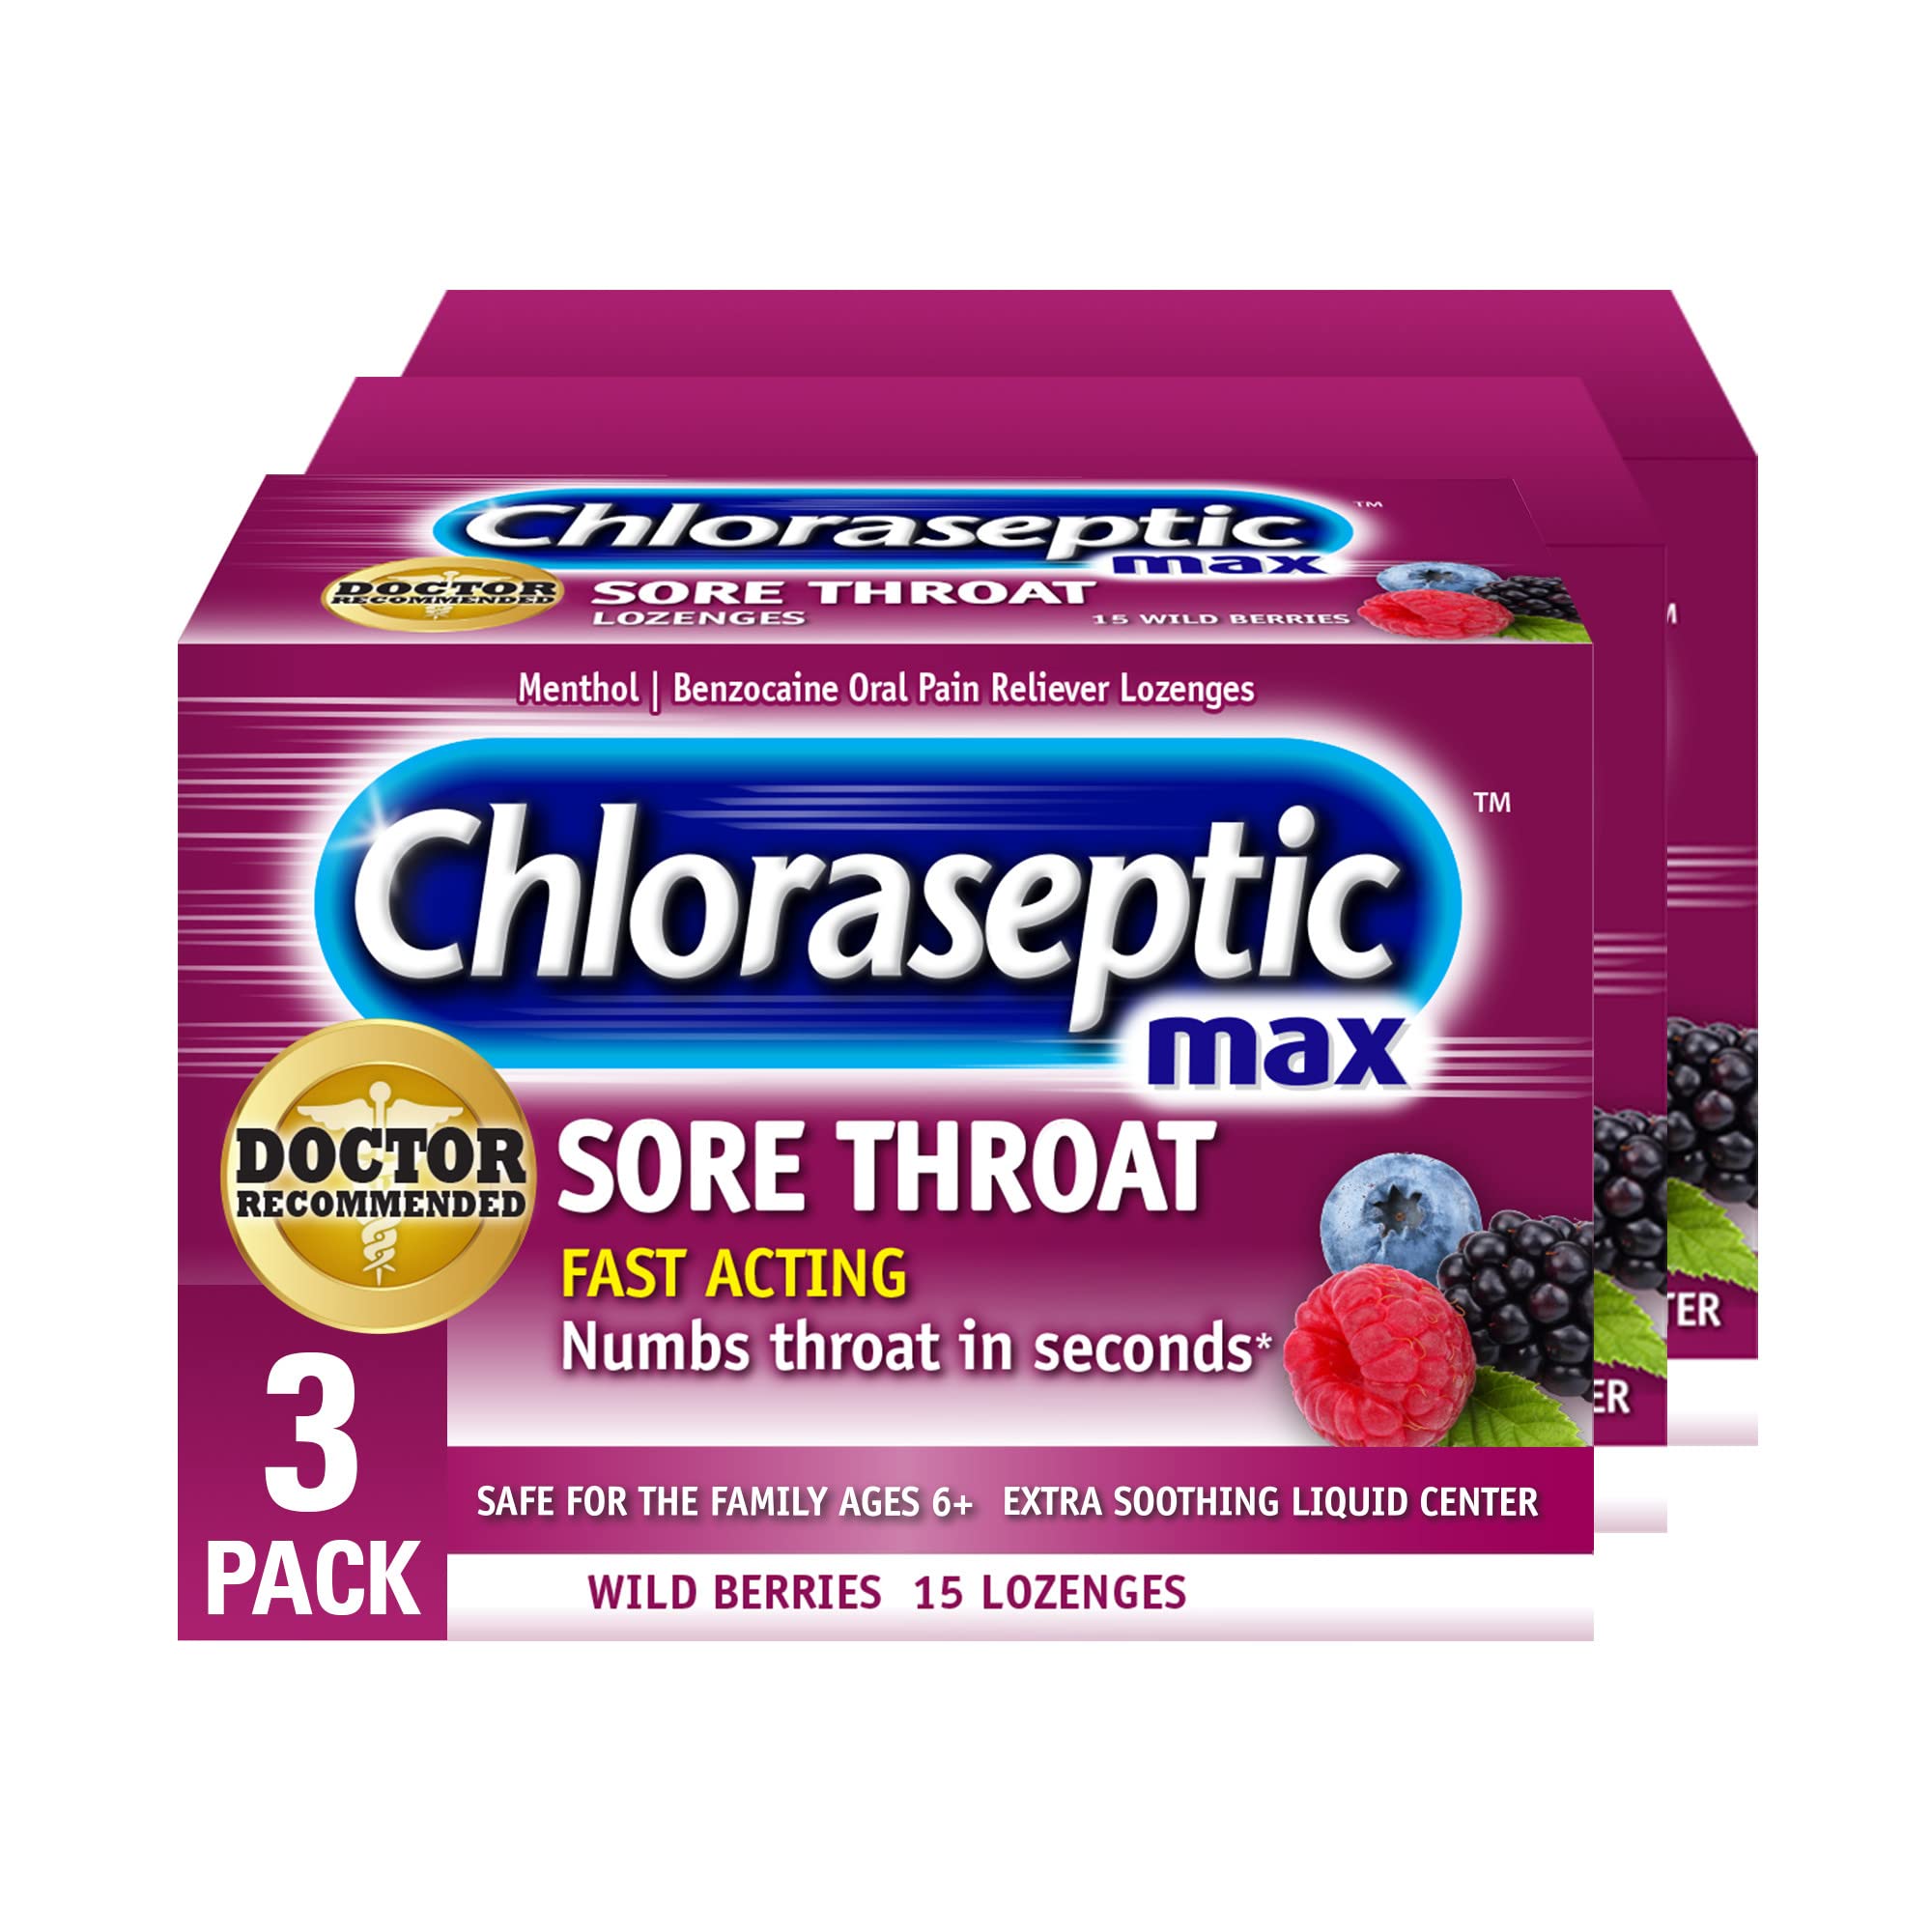 $6.74 w/ S&S: 3-Pack 15-Count Chloraseptic Max Strength Sore Throat Lozenges (Wild Berries)